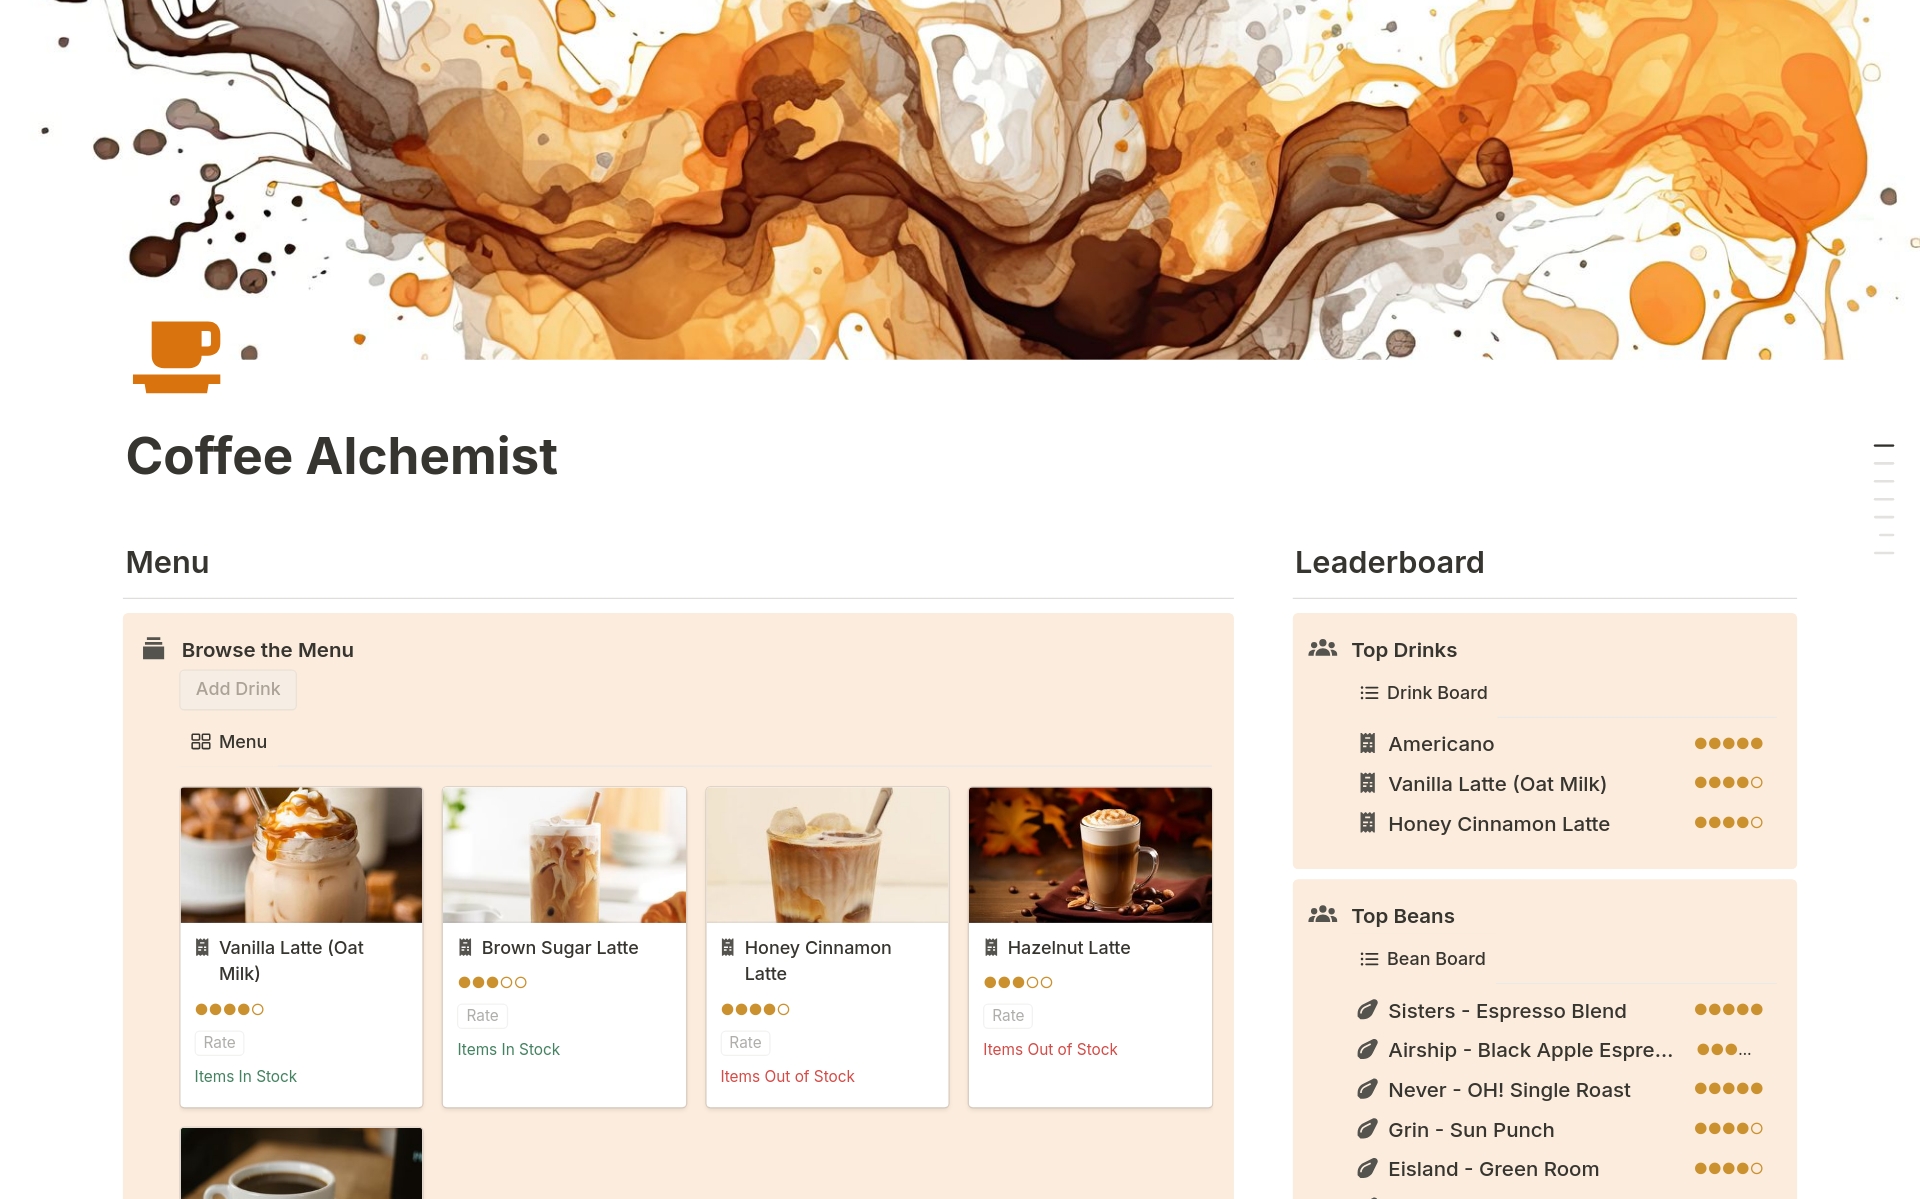 The Coffee Alchemist. A comprehensive system designed to help you manage and perfect your coffee experience. The essential tool for any coffee enthusiast.